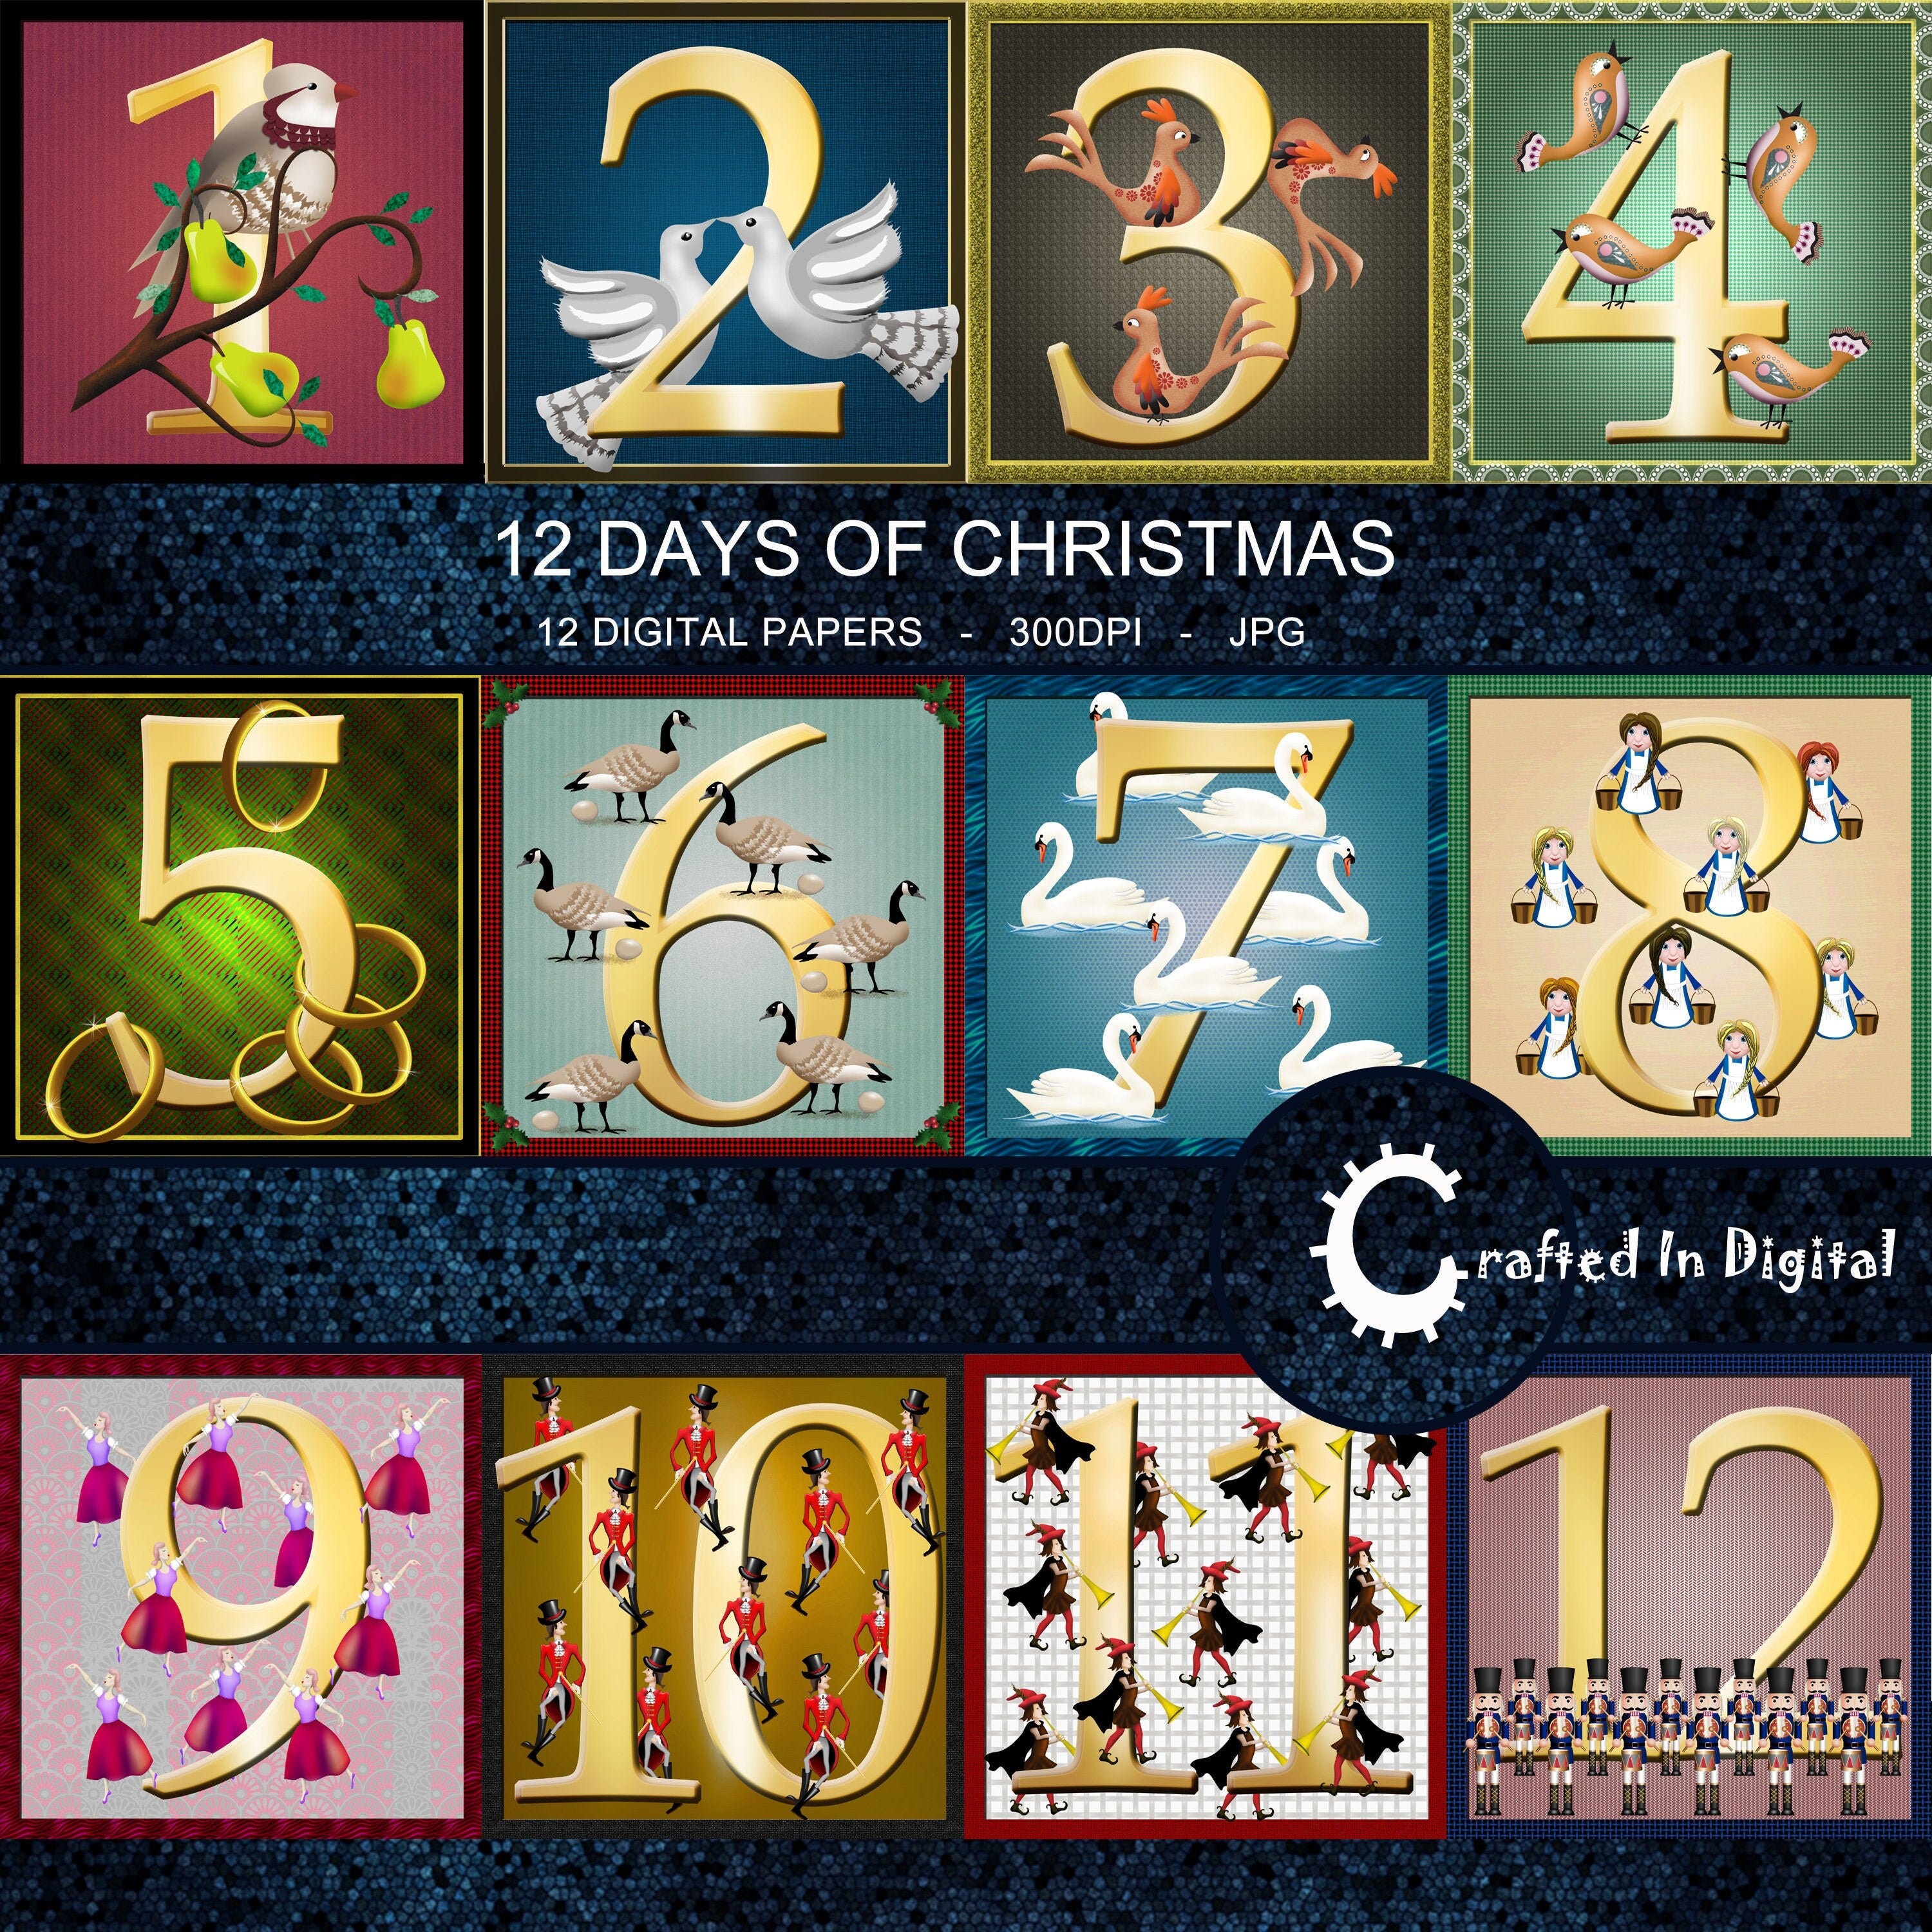 12 Days of Christmas Vignettes - Digital Paper Collection